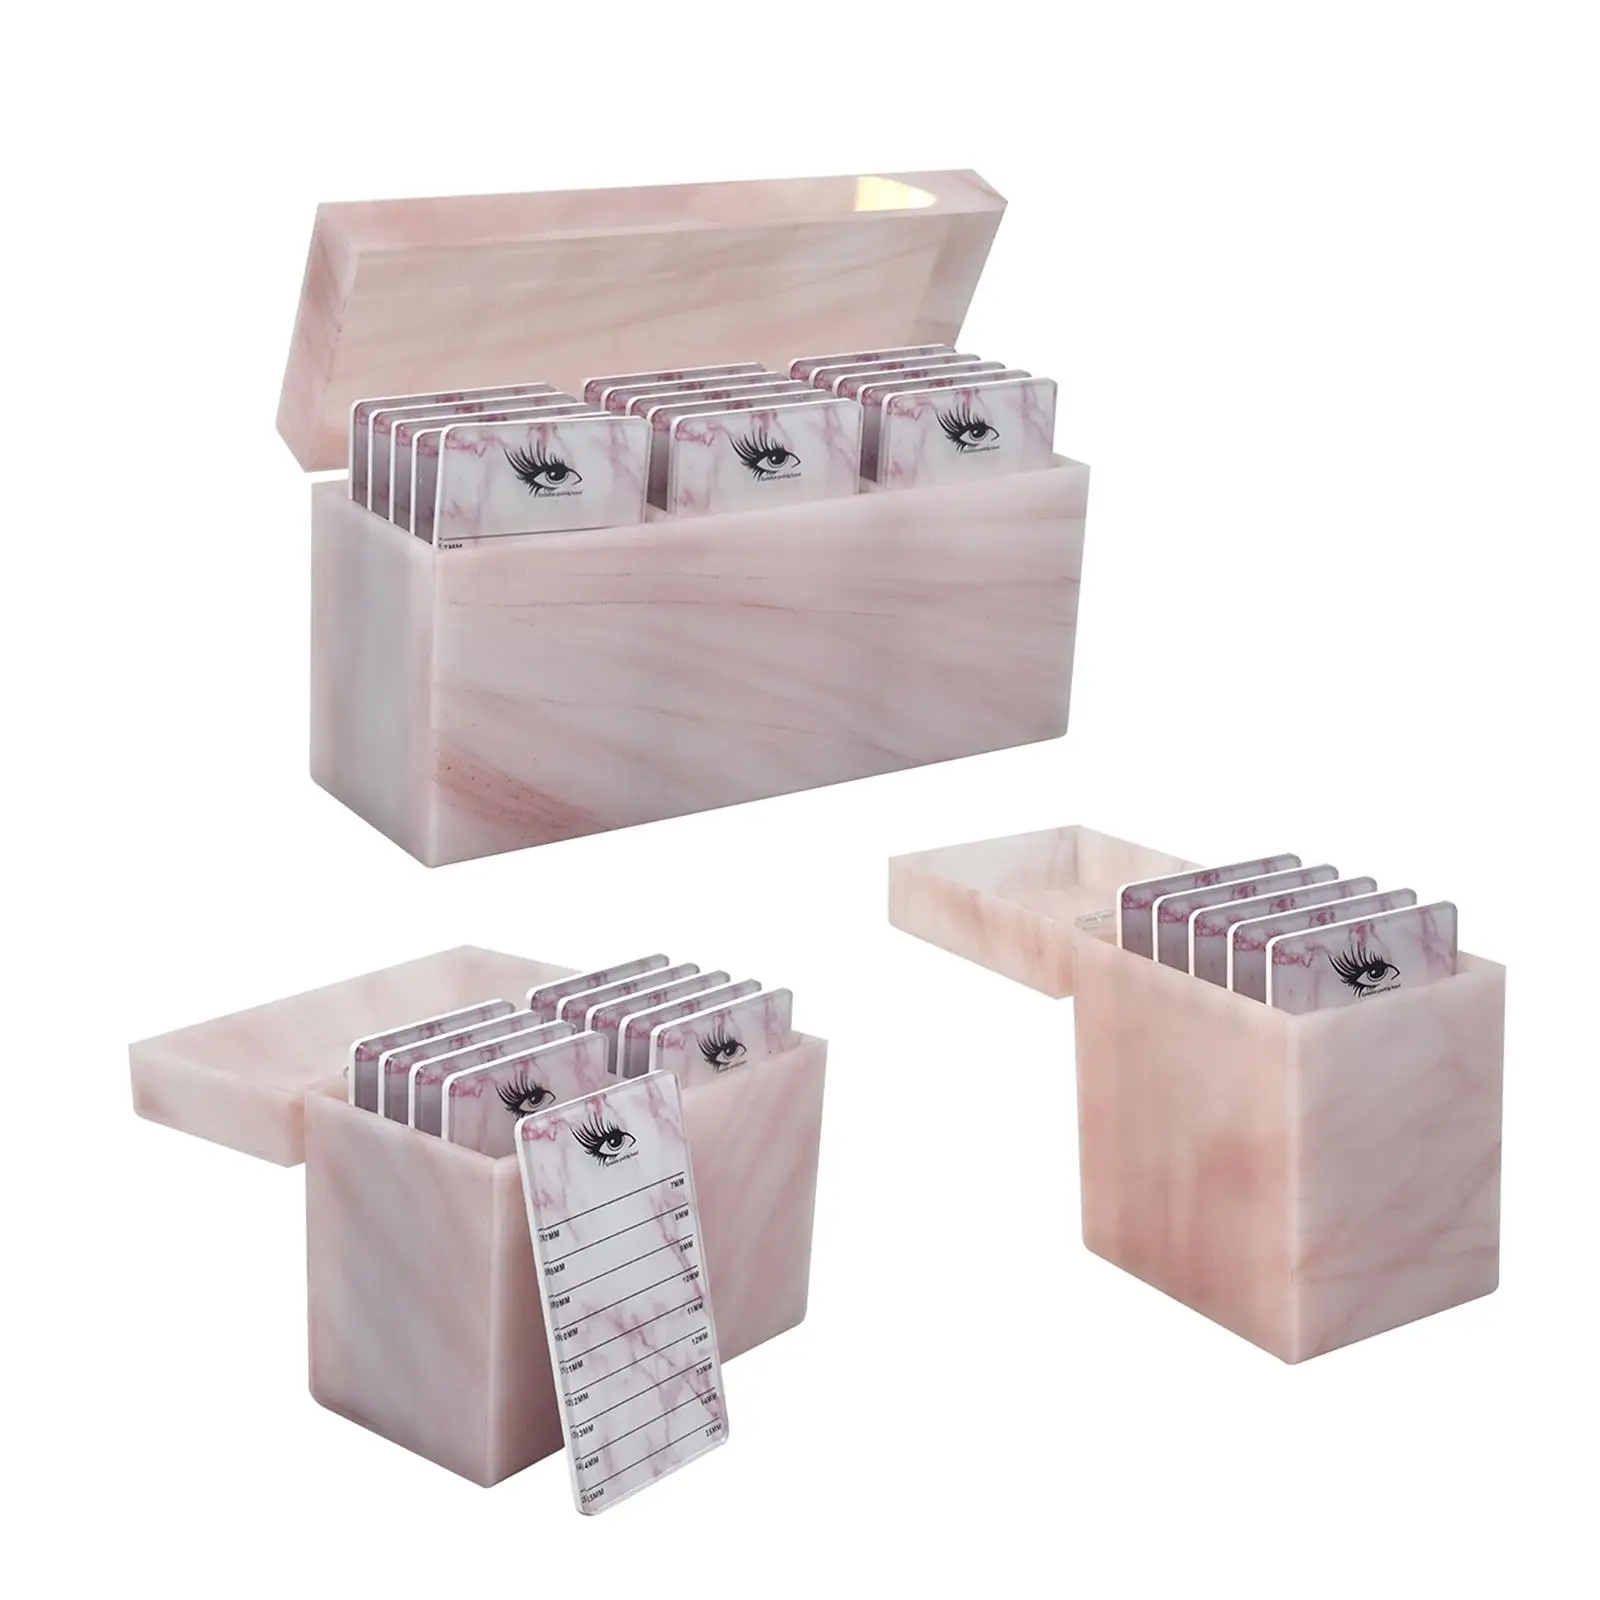 Dustproof Storage Holder Large Capacity Grafting Case Cosmetic Makeup Tool Multiple Layers Durable Portable Organizer Stand